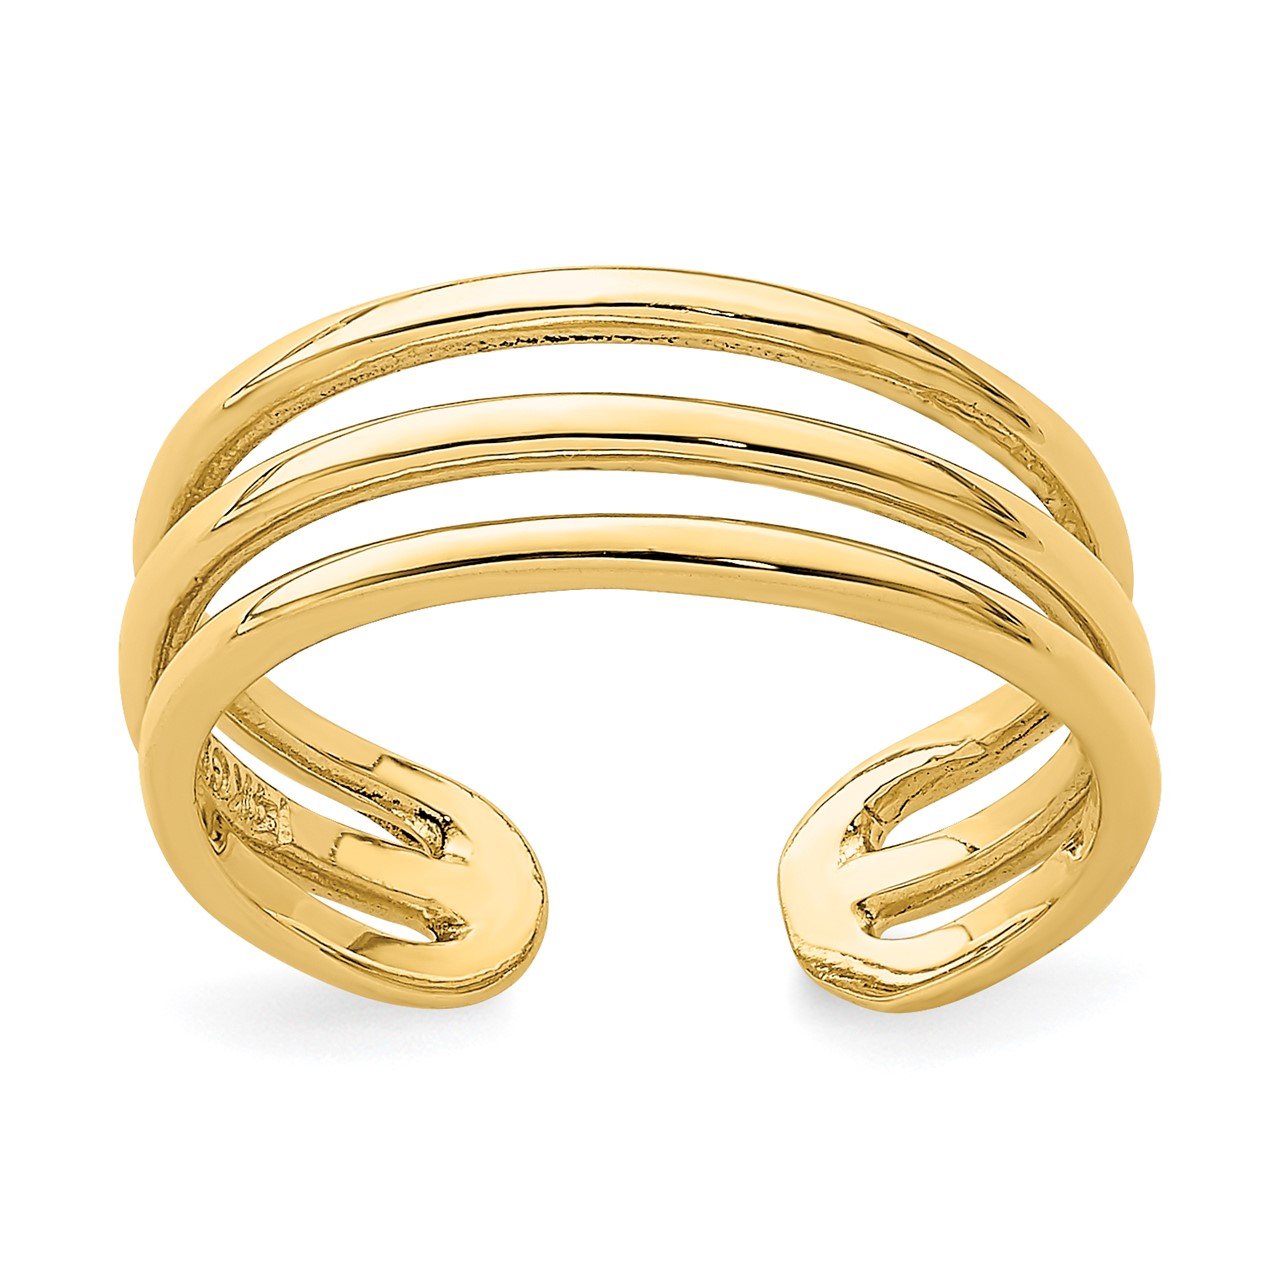 14K Polished 3 Row Toe Ring | The Gold Store